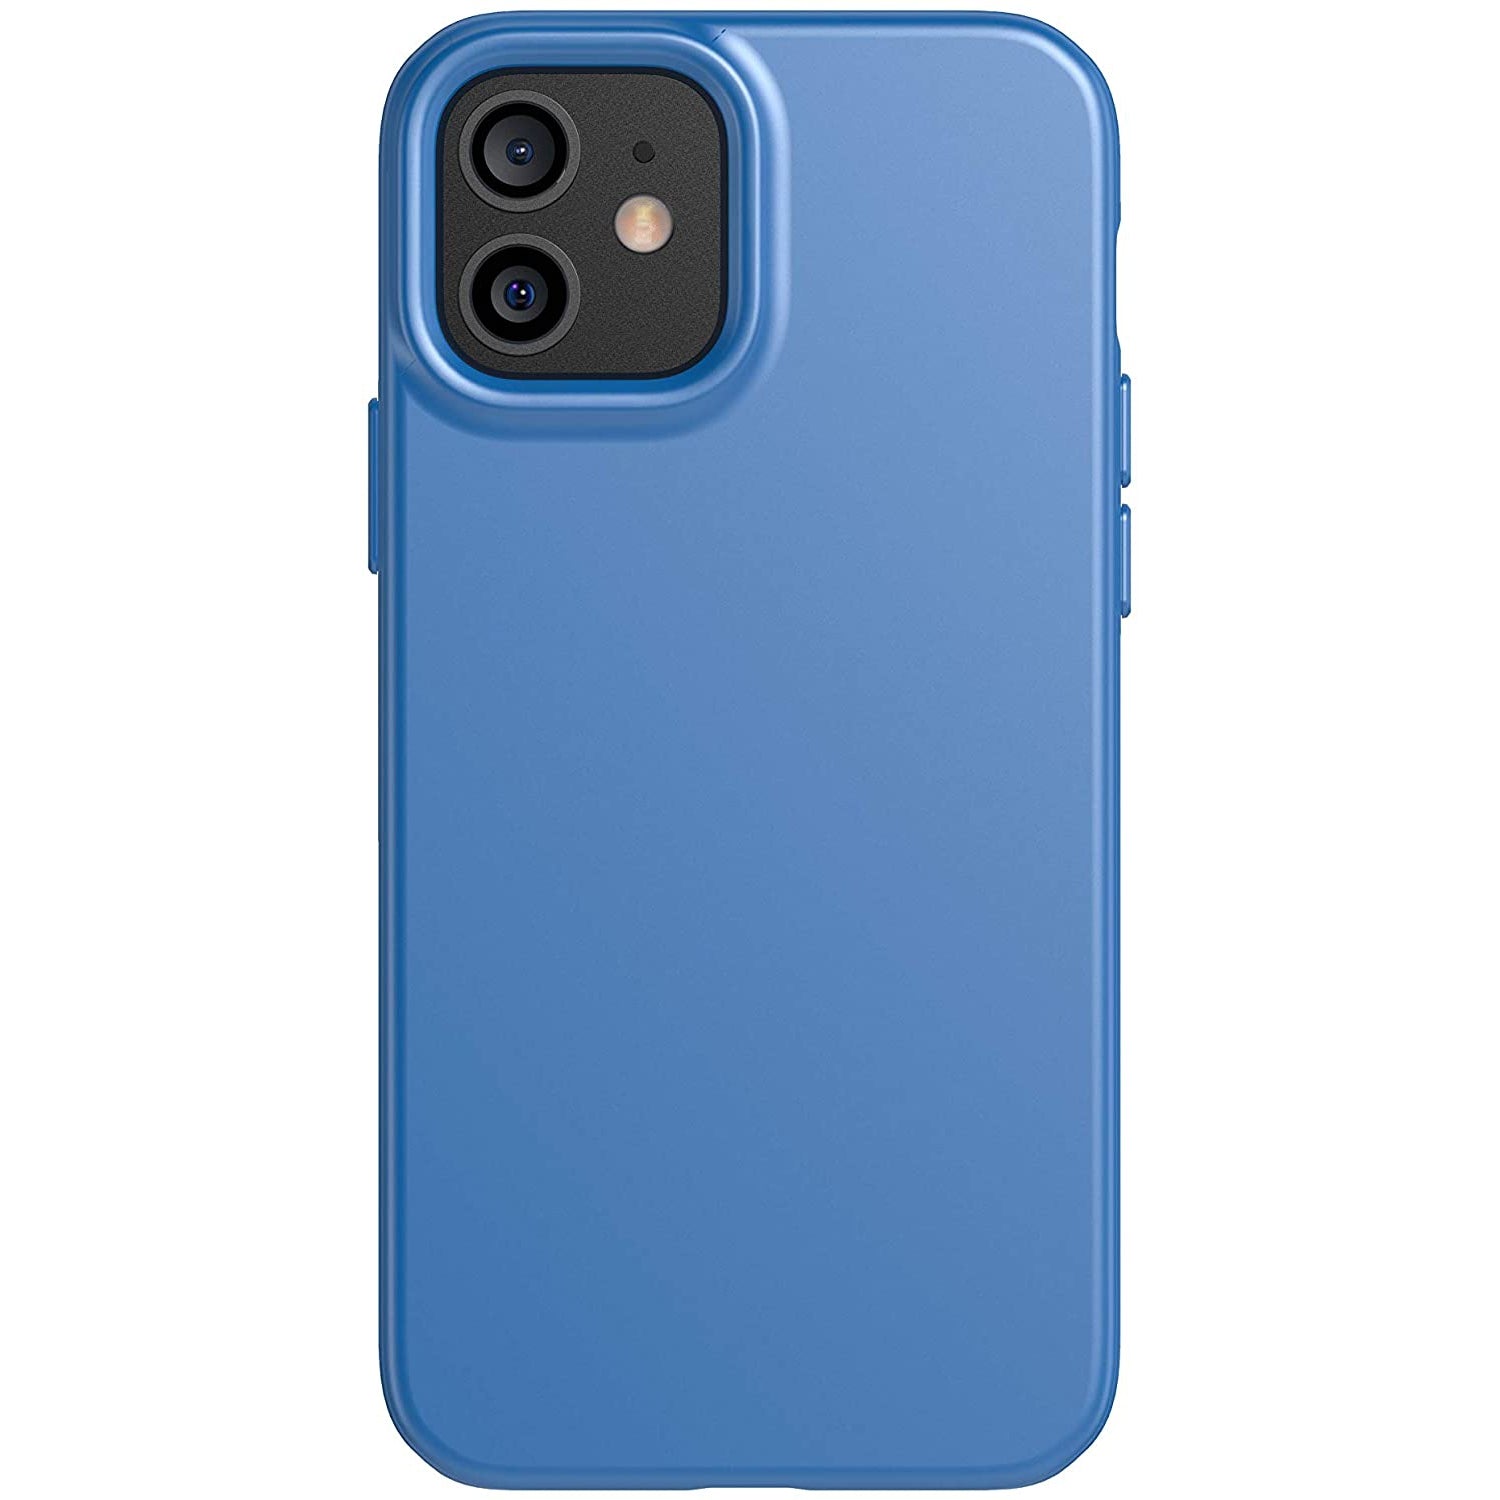 Tech21 Evo Slim for Apple iPhone 12 and 12 Pro 5G - Germ Fighting Antimicrobial Phone Case with 2.6 Meter Drop Protection